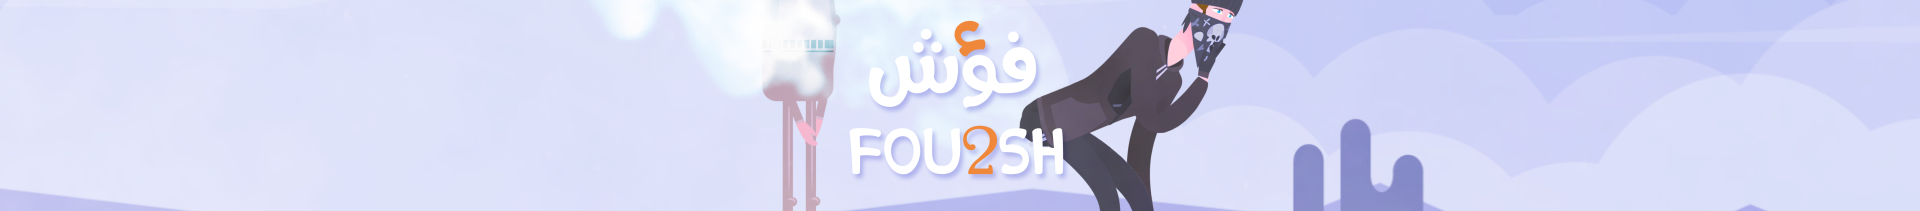 Ahmed Fouad's profile banner